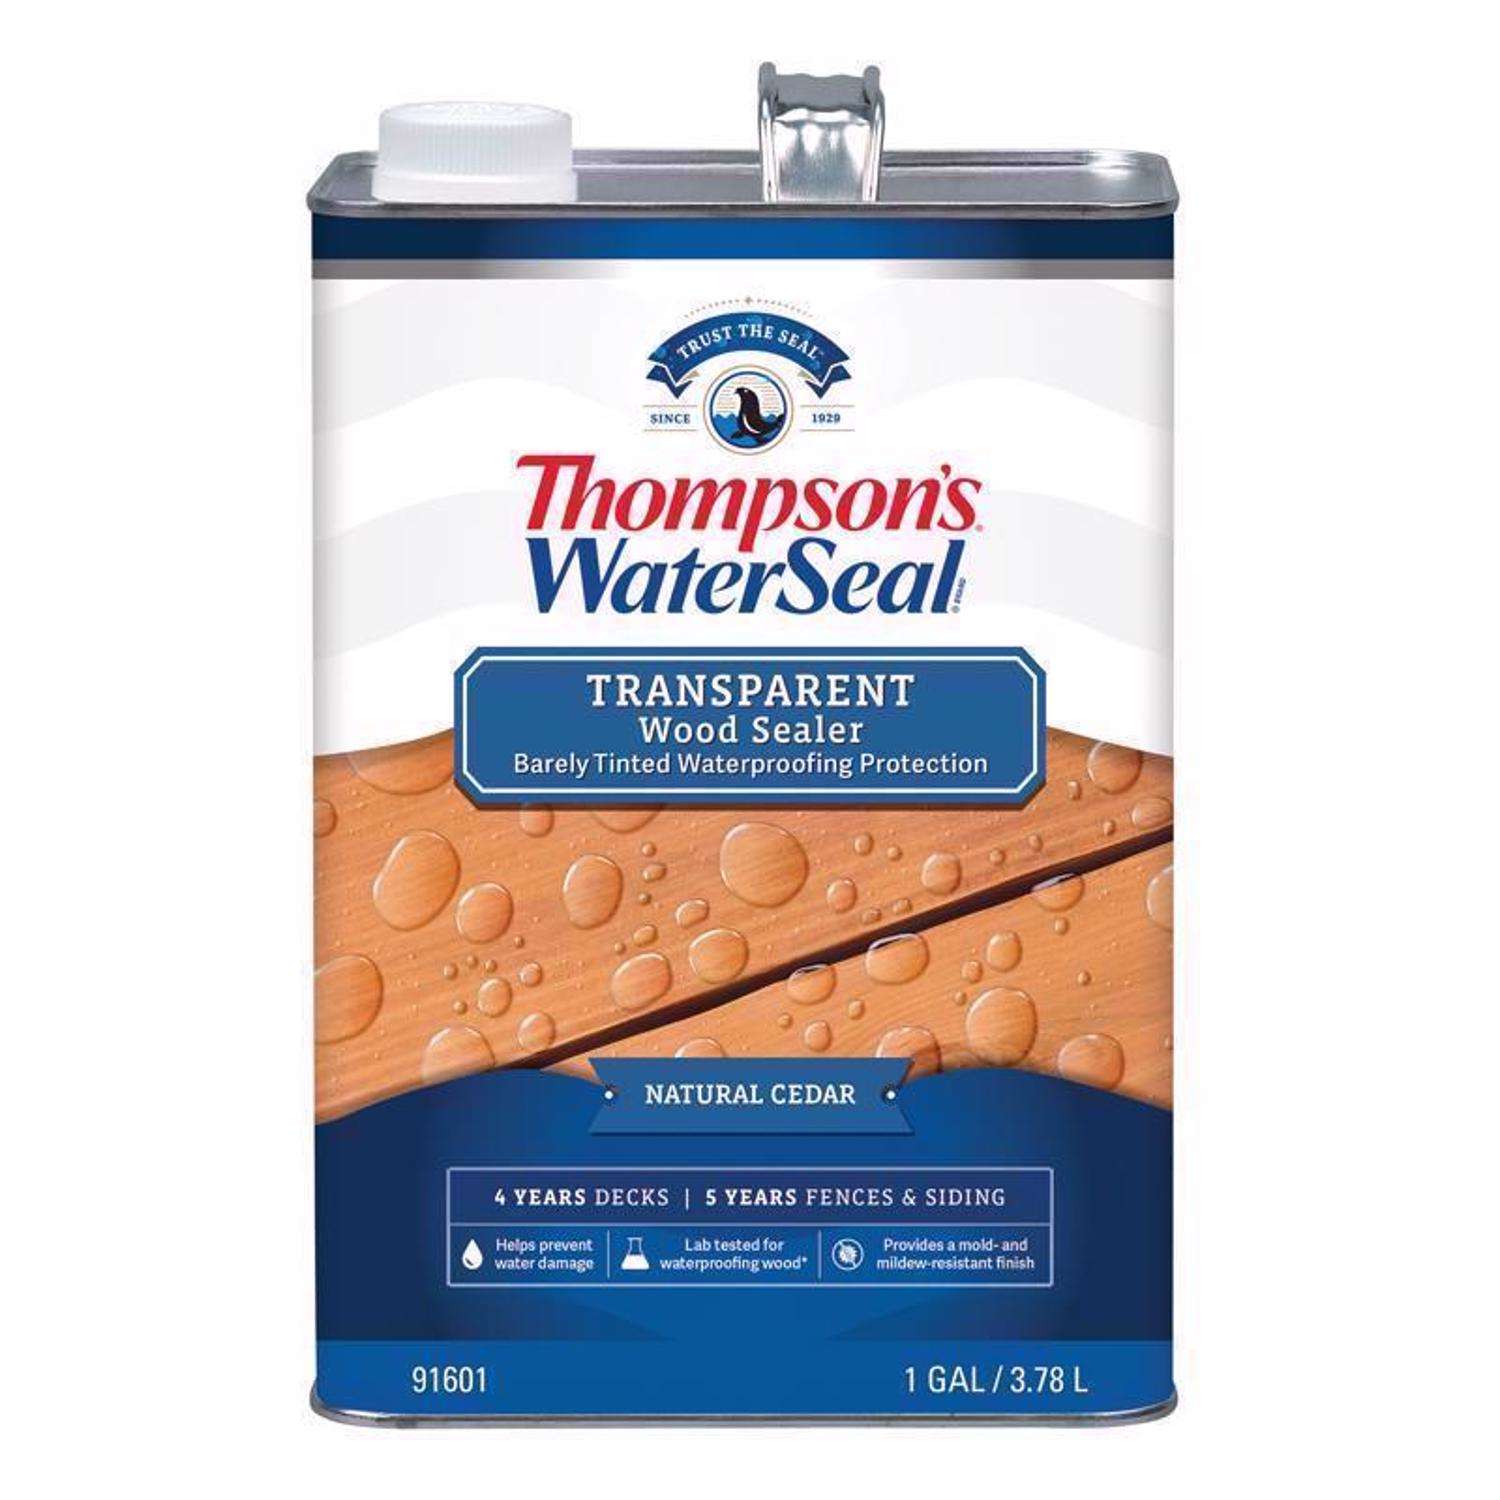 Thompson's WaterSeal Multi-Surface Waterproofer Wood Finish, Clear, 5 Gallon